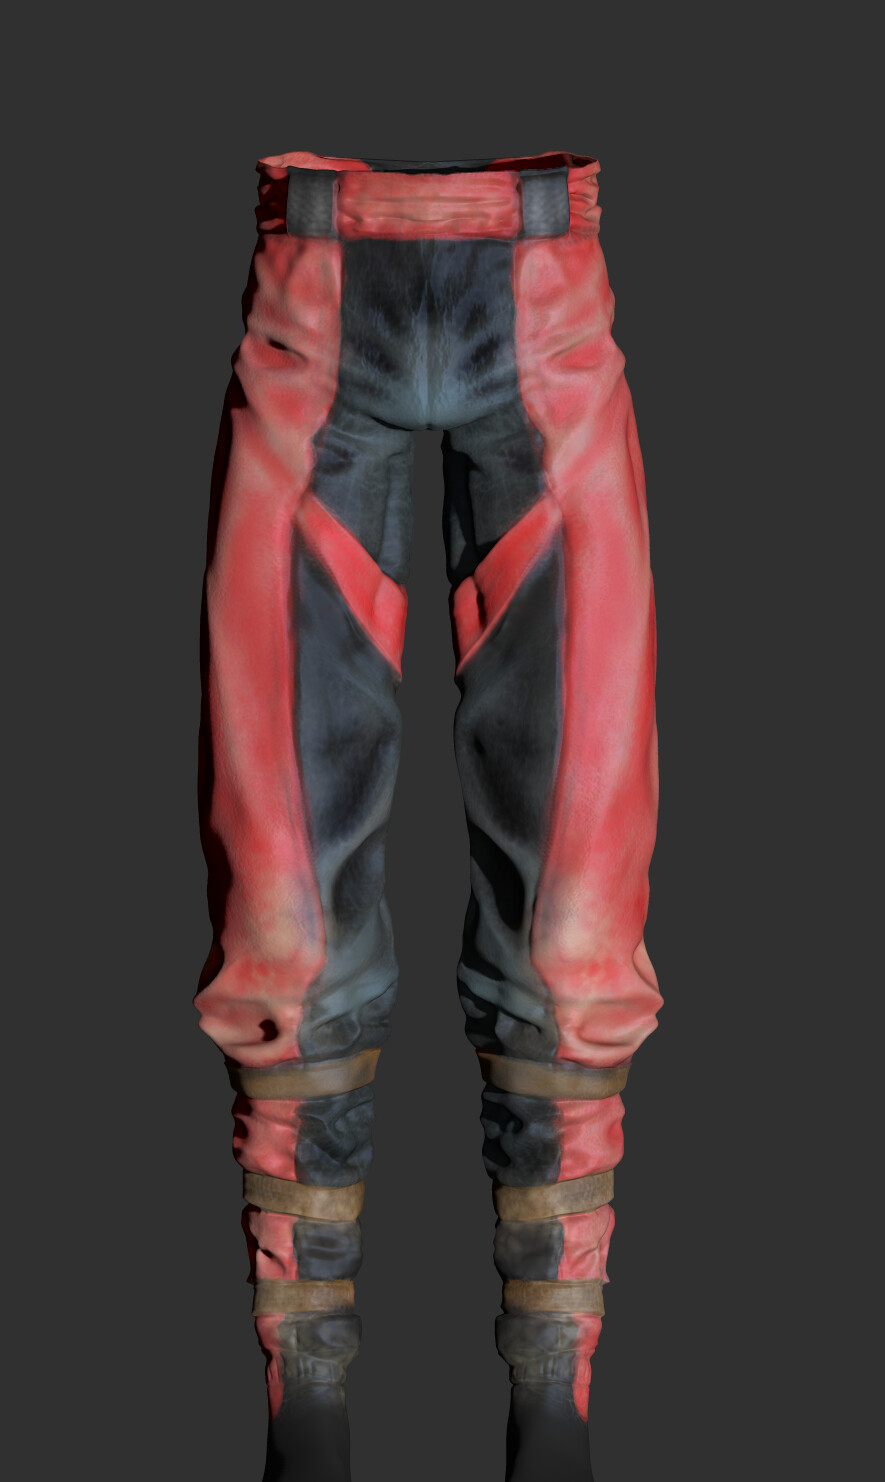 ArtStation - Liu kang costume production for personal use in The Sims 4